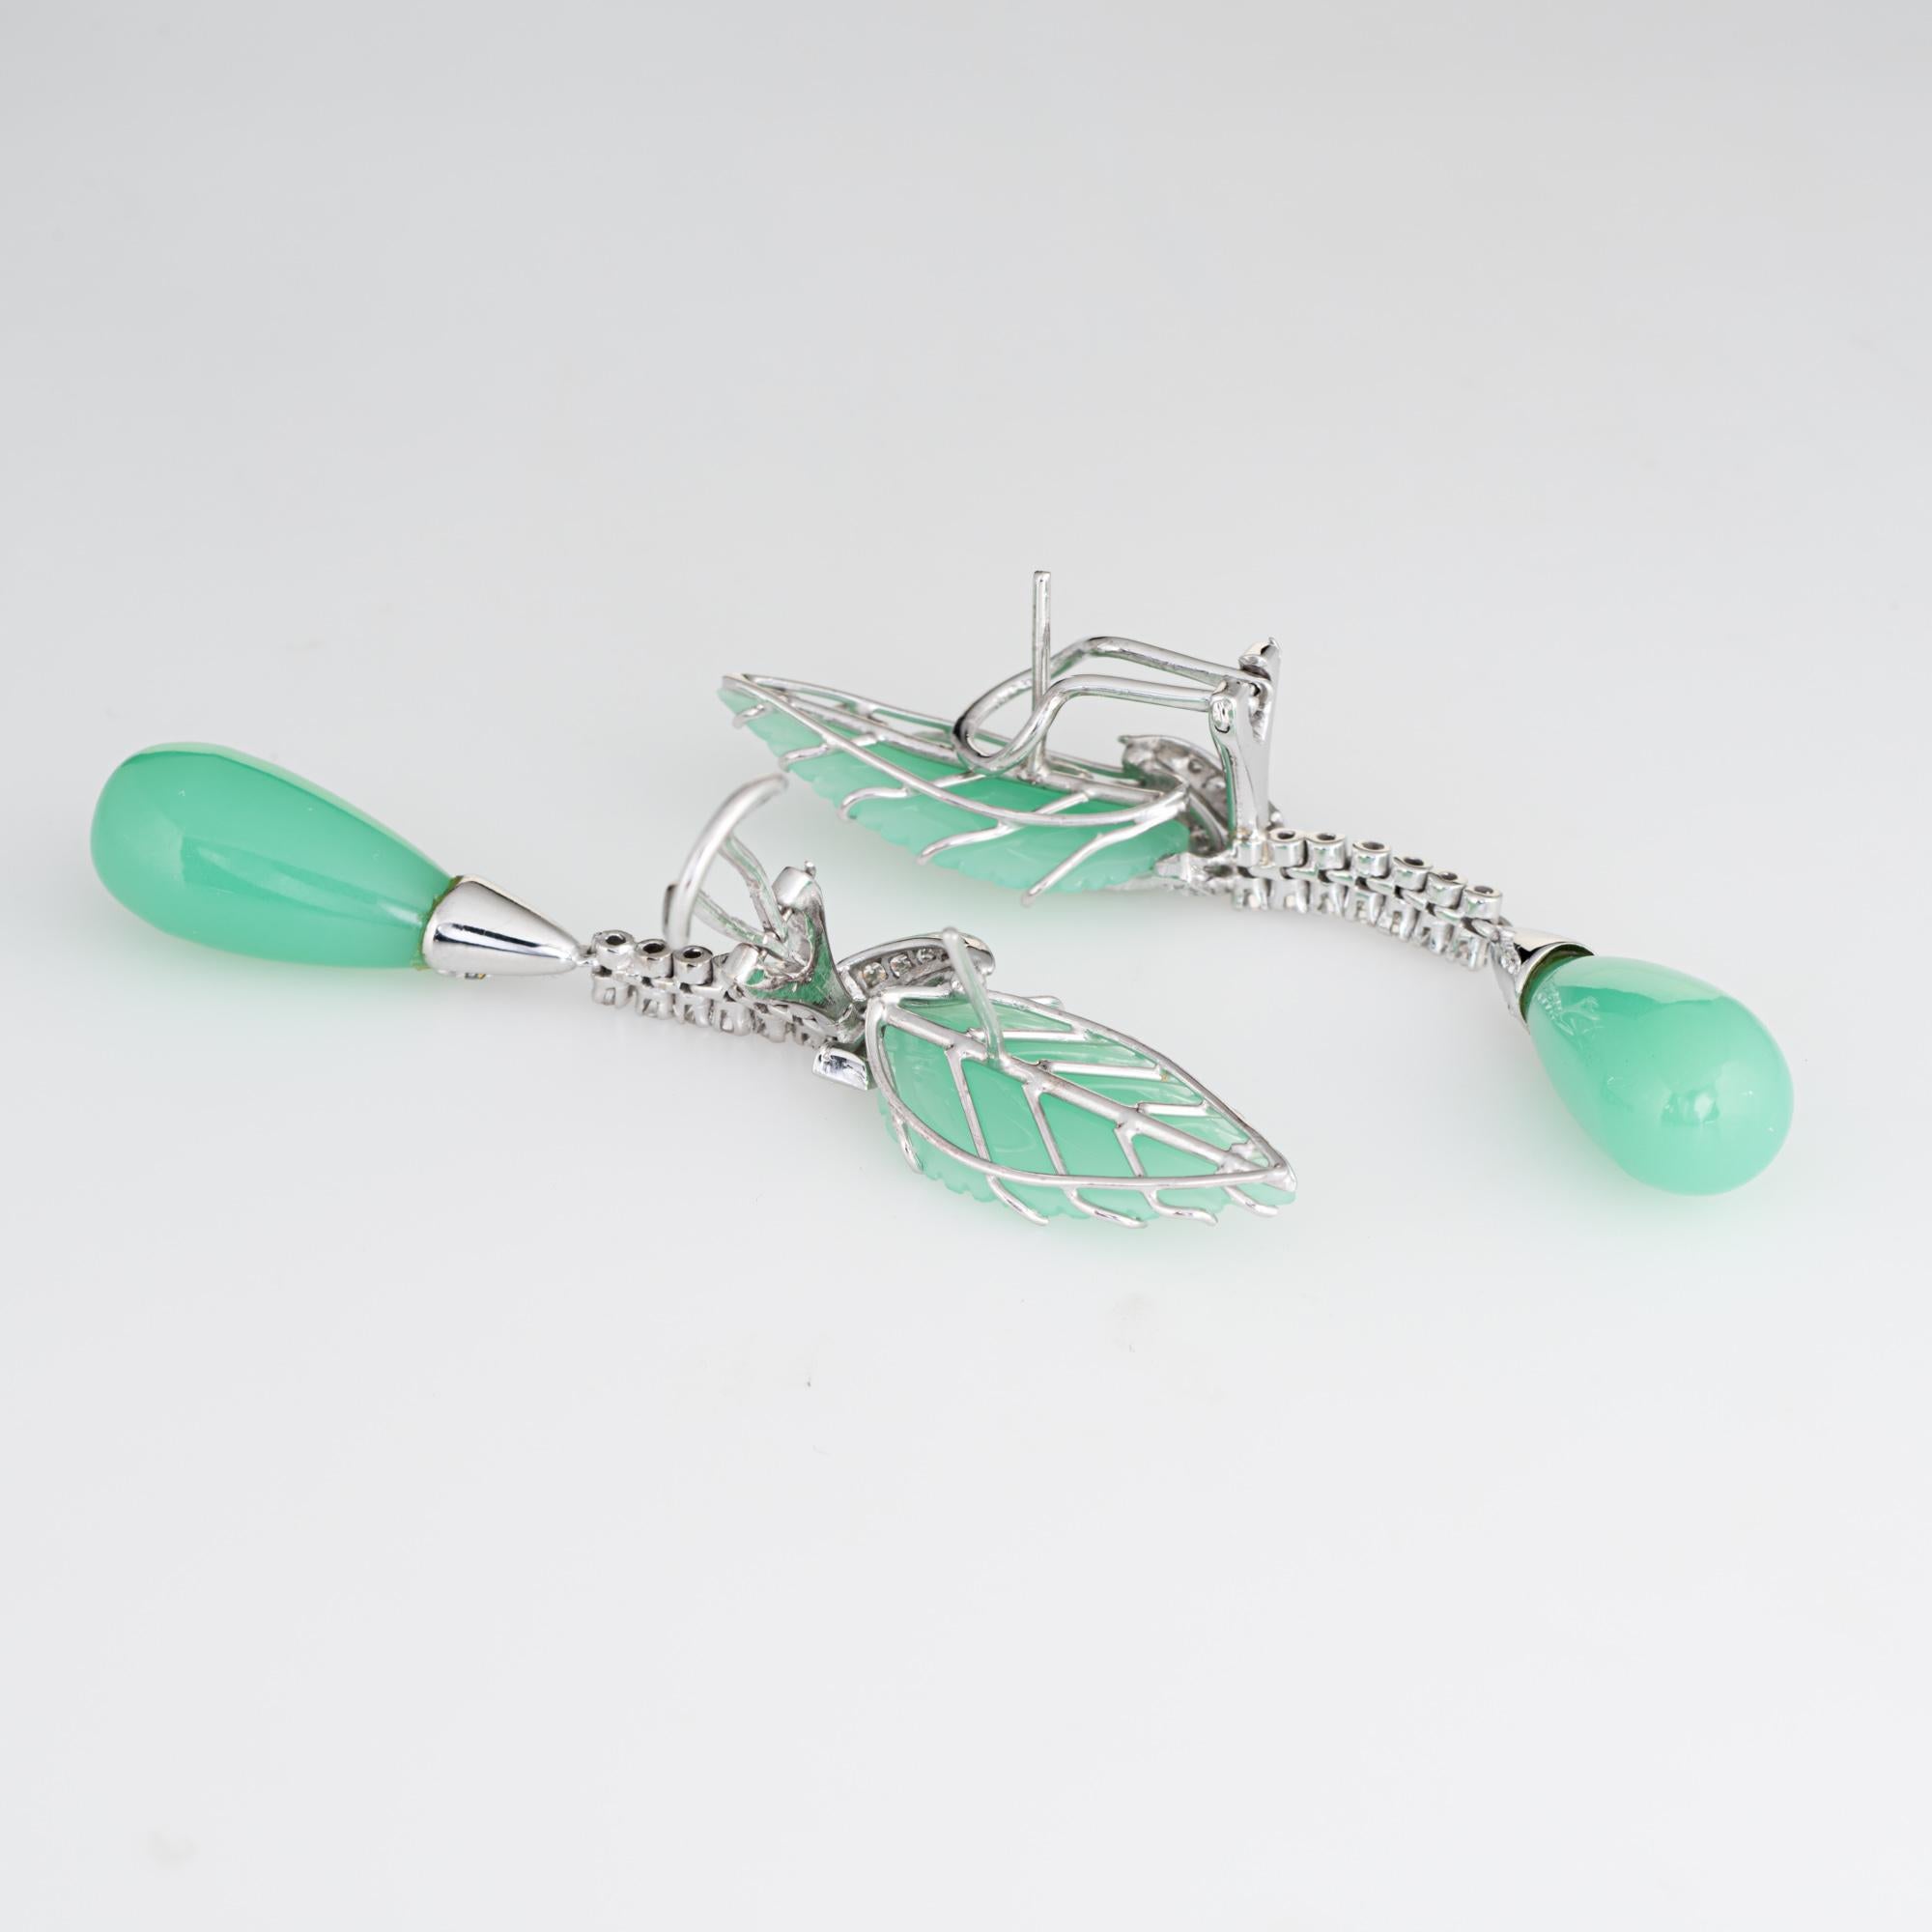 Elegant pair of estate chrysoprase & diamond leaf drop earrings crafted in 14k white gold. 

46 round single cut diamonds total an estimated 0.60 carats (estimated at I-J color and SI2-I1 clarity). Carved chrysoprase leaves measure 25mm x 10mm and